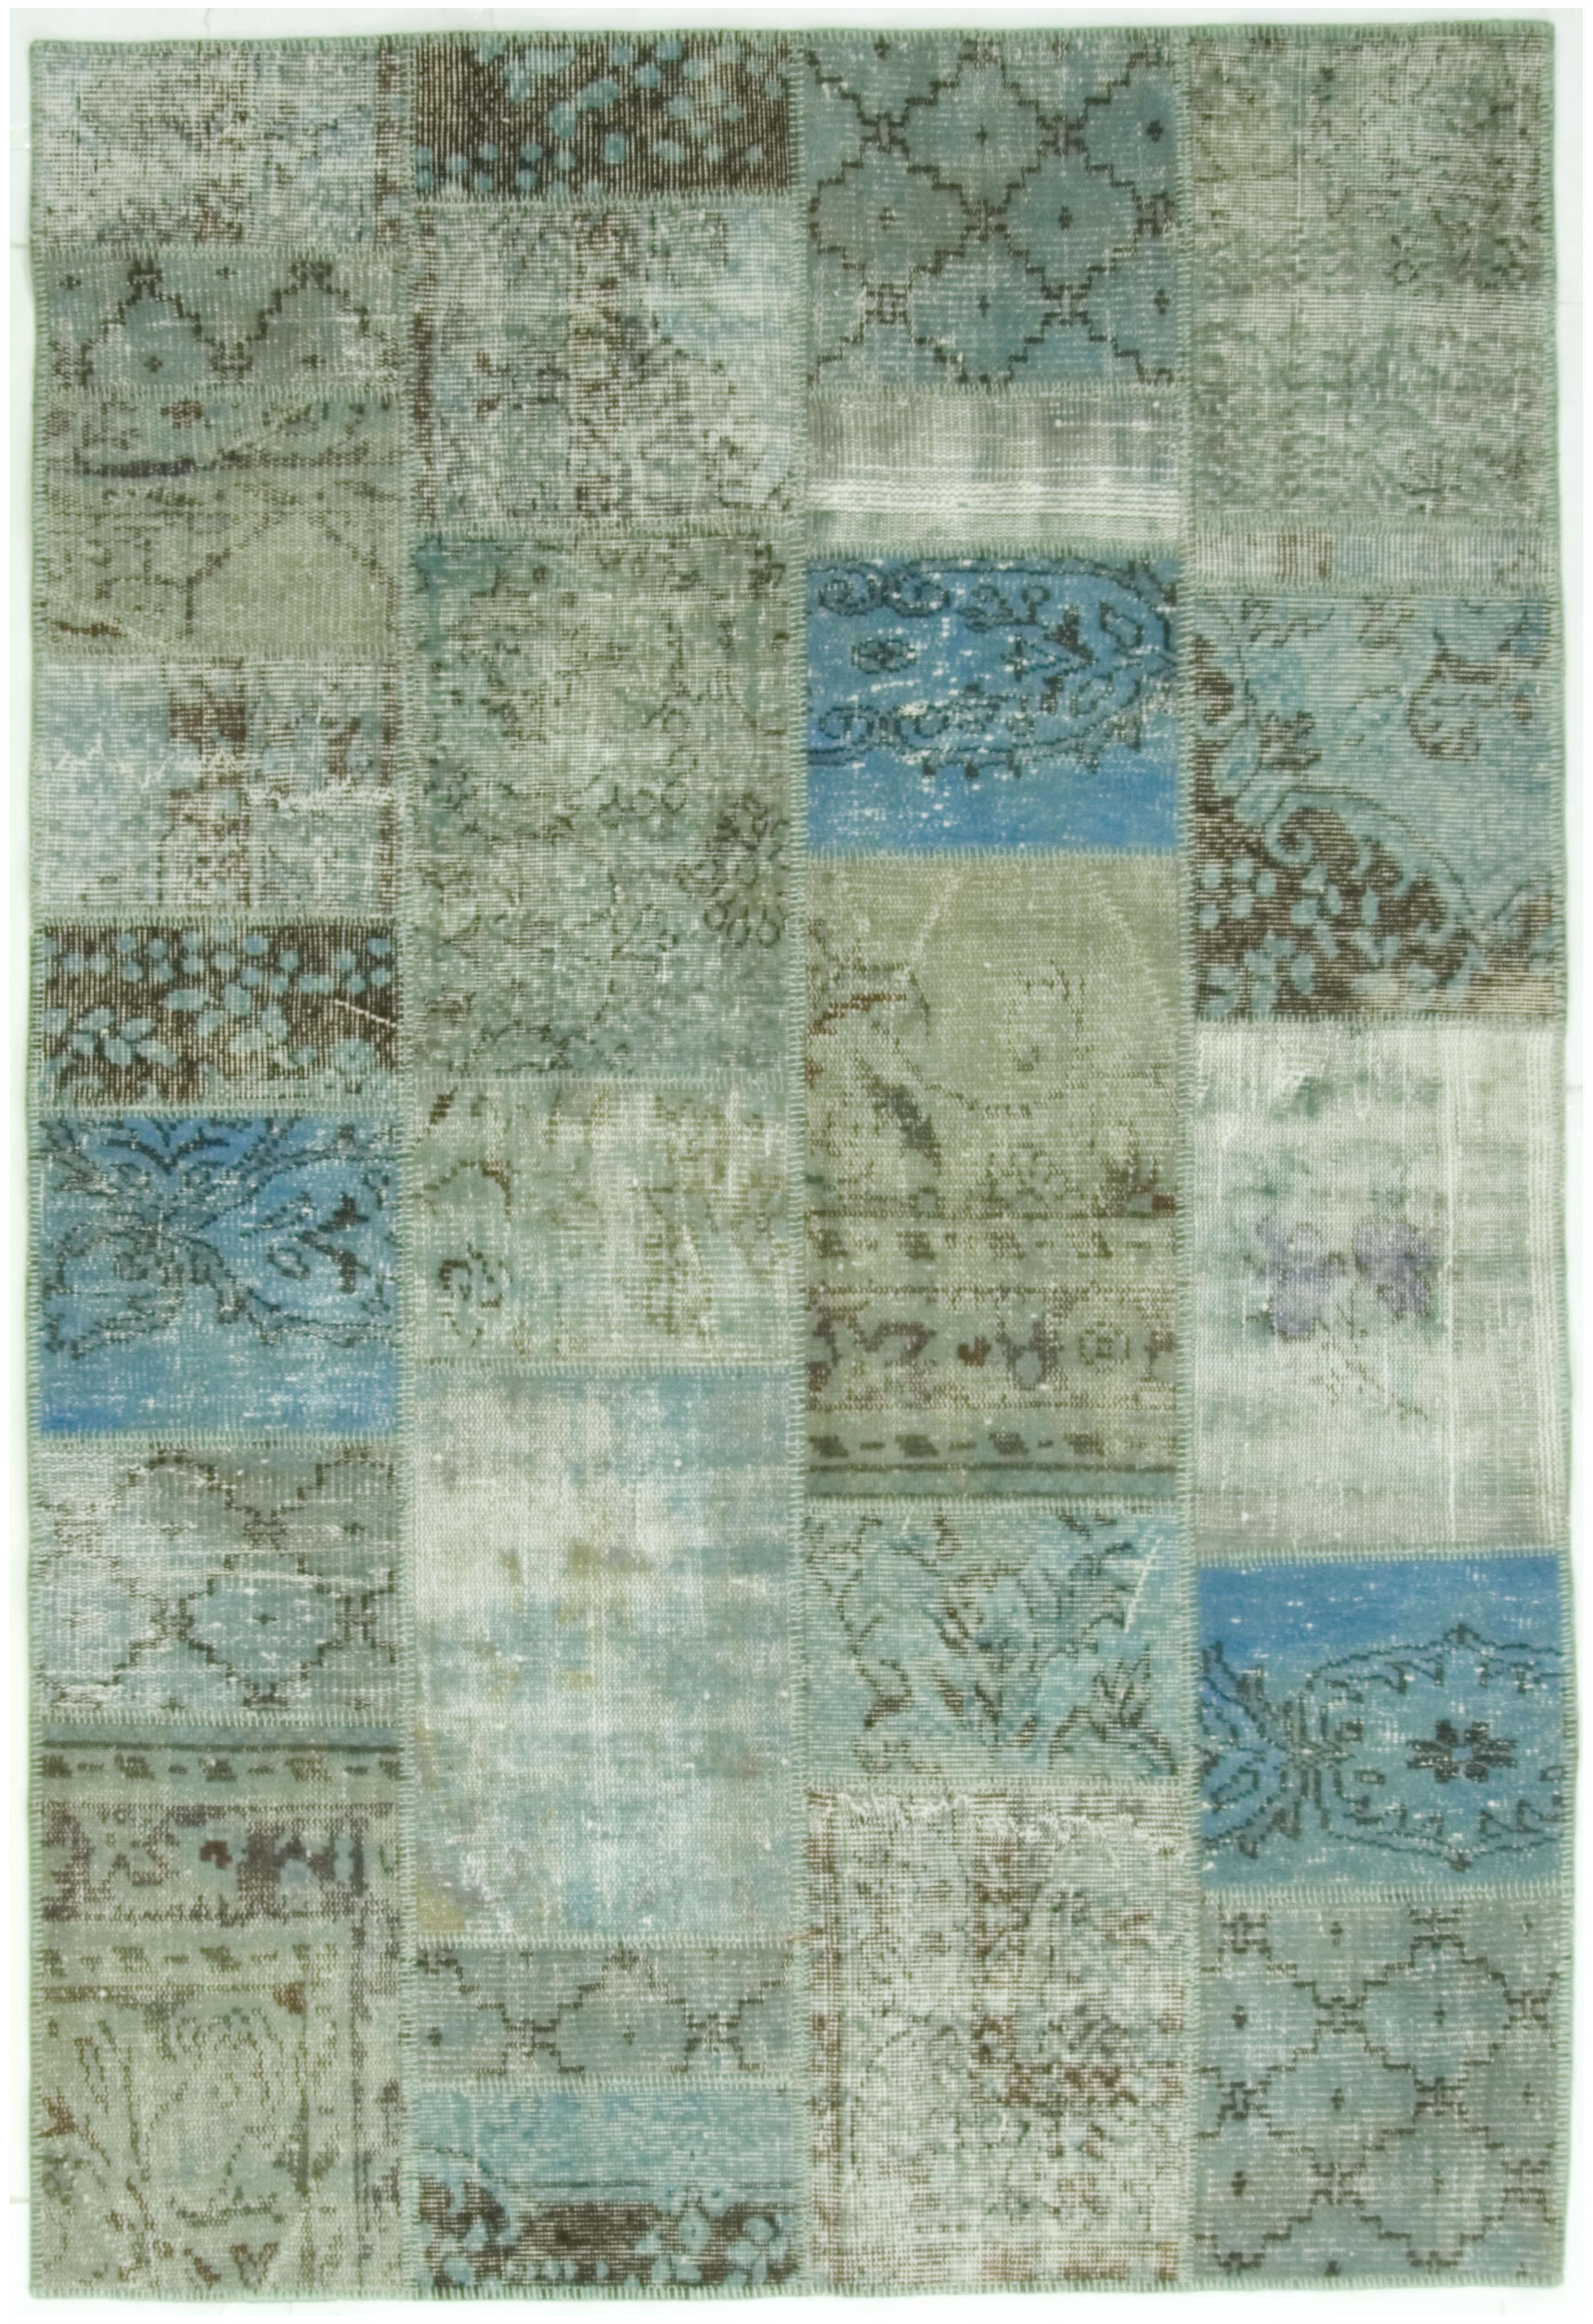 Vintage Turkish patchwork overdyed rug 4'7 x 7'. Vintage Turkish patchwork overdyed rug. This is a fine example of an overdyed patchwork area rug. These rugs demonstrate a process best described as 'The modern palette applied to classics'. It